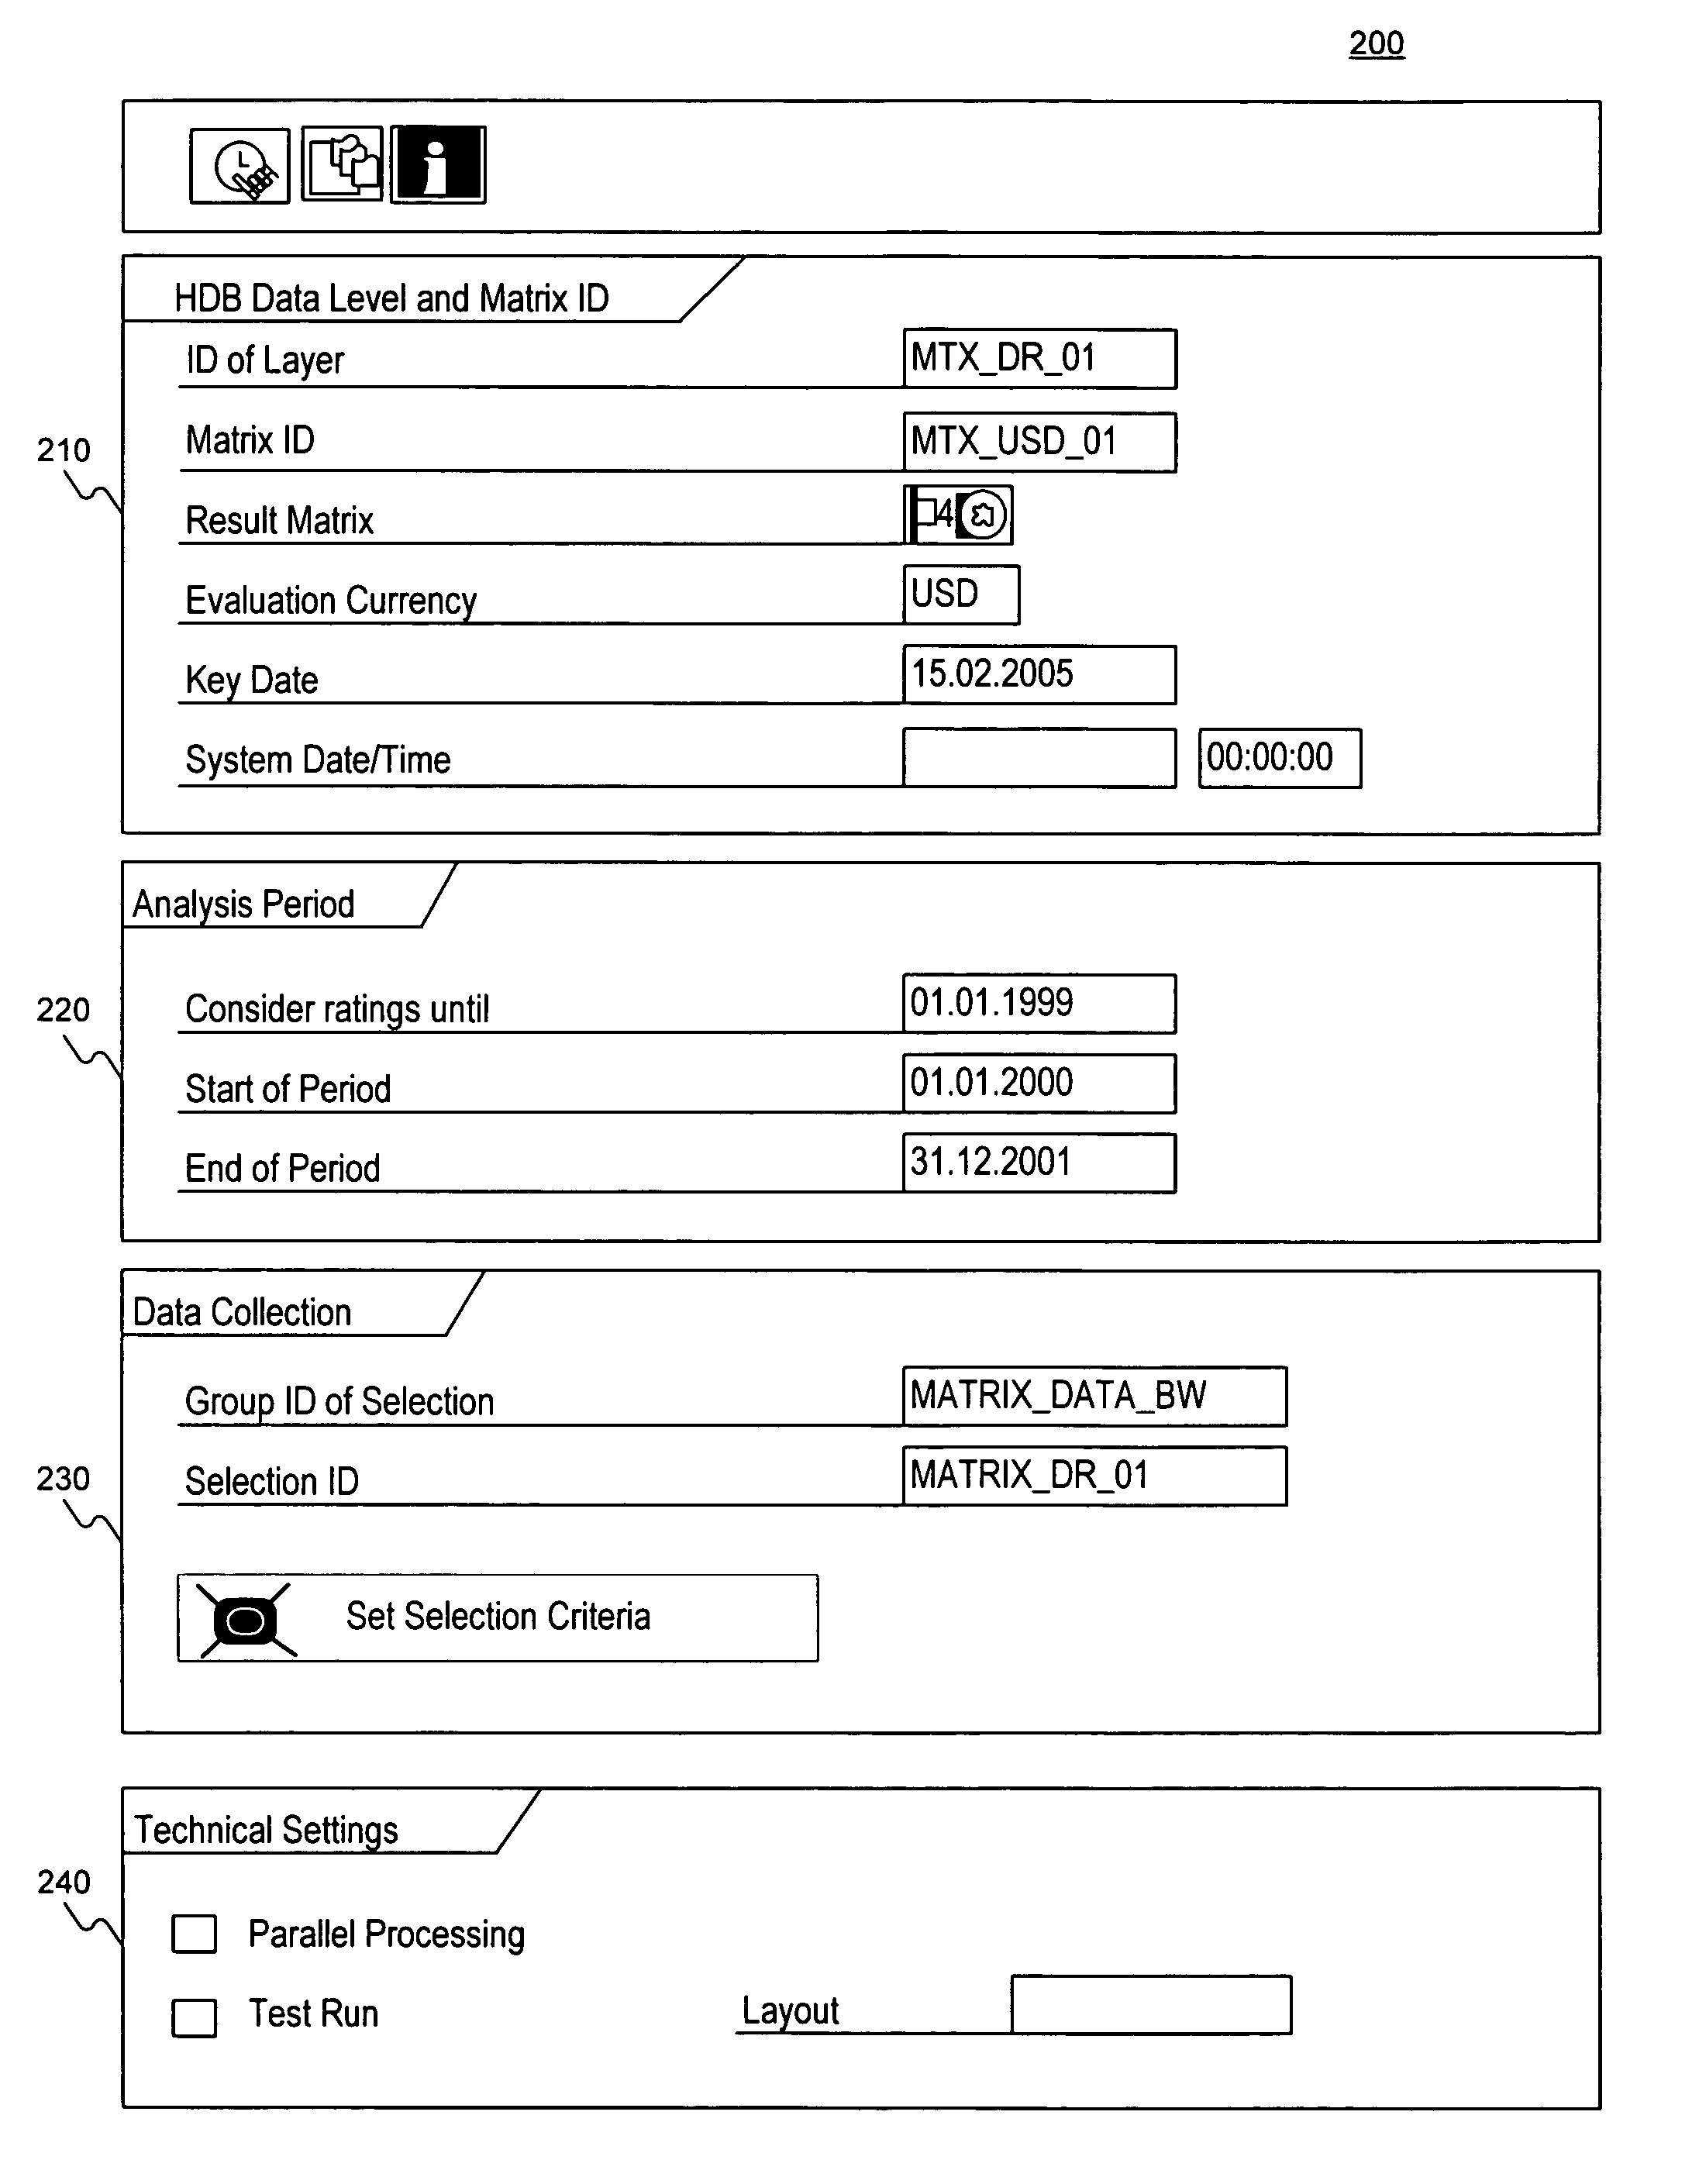 Systems and methods for providing migration and performance matrices